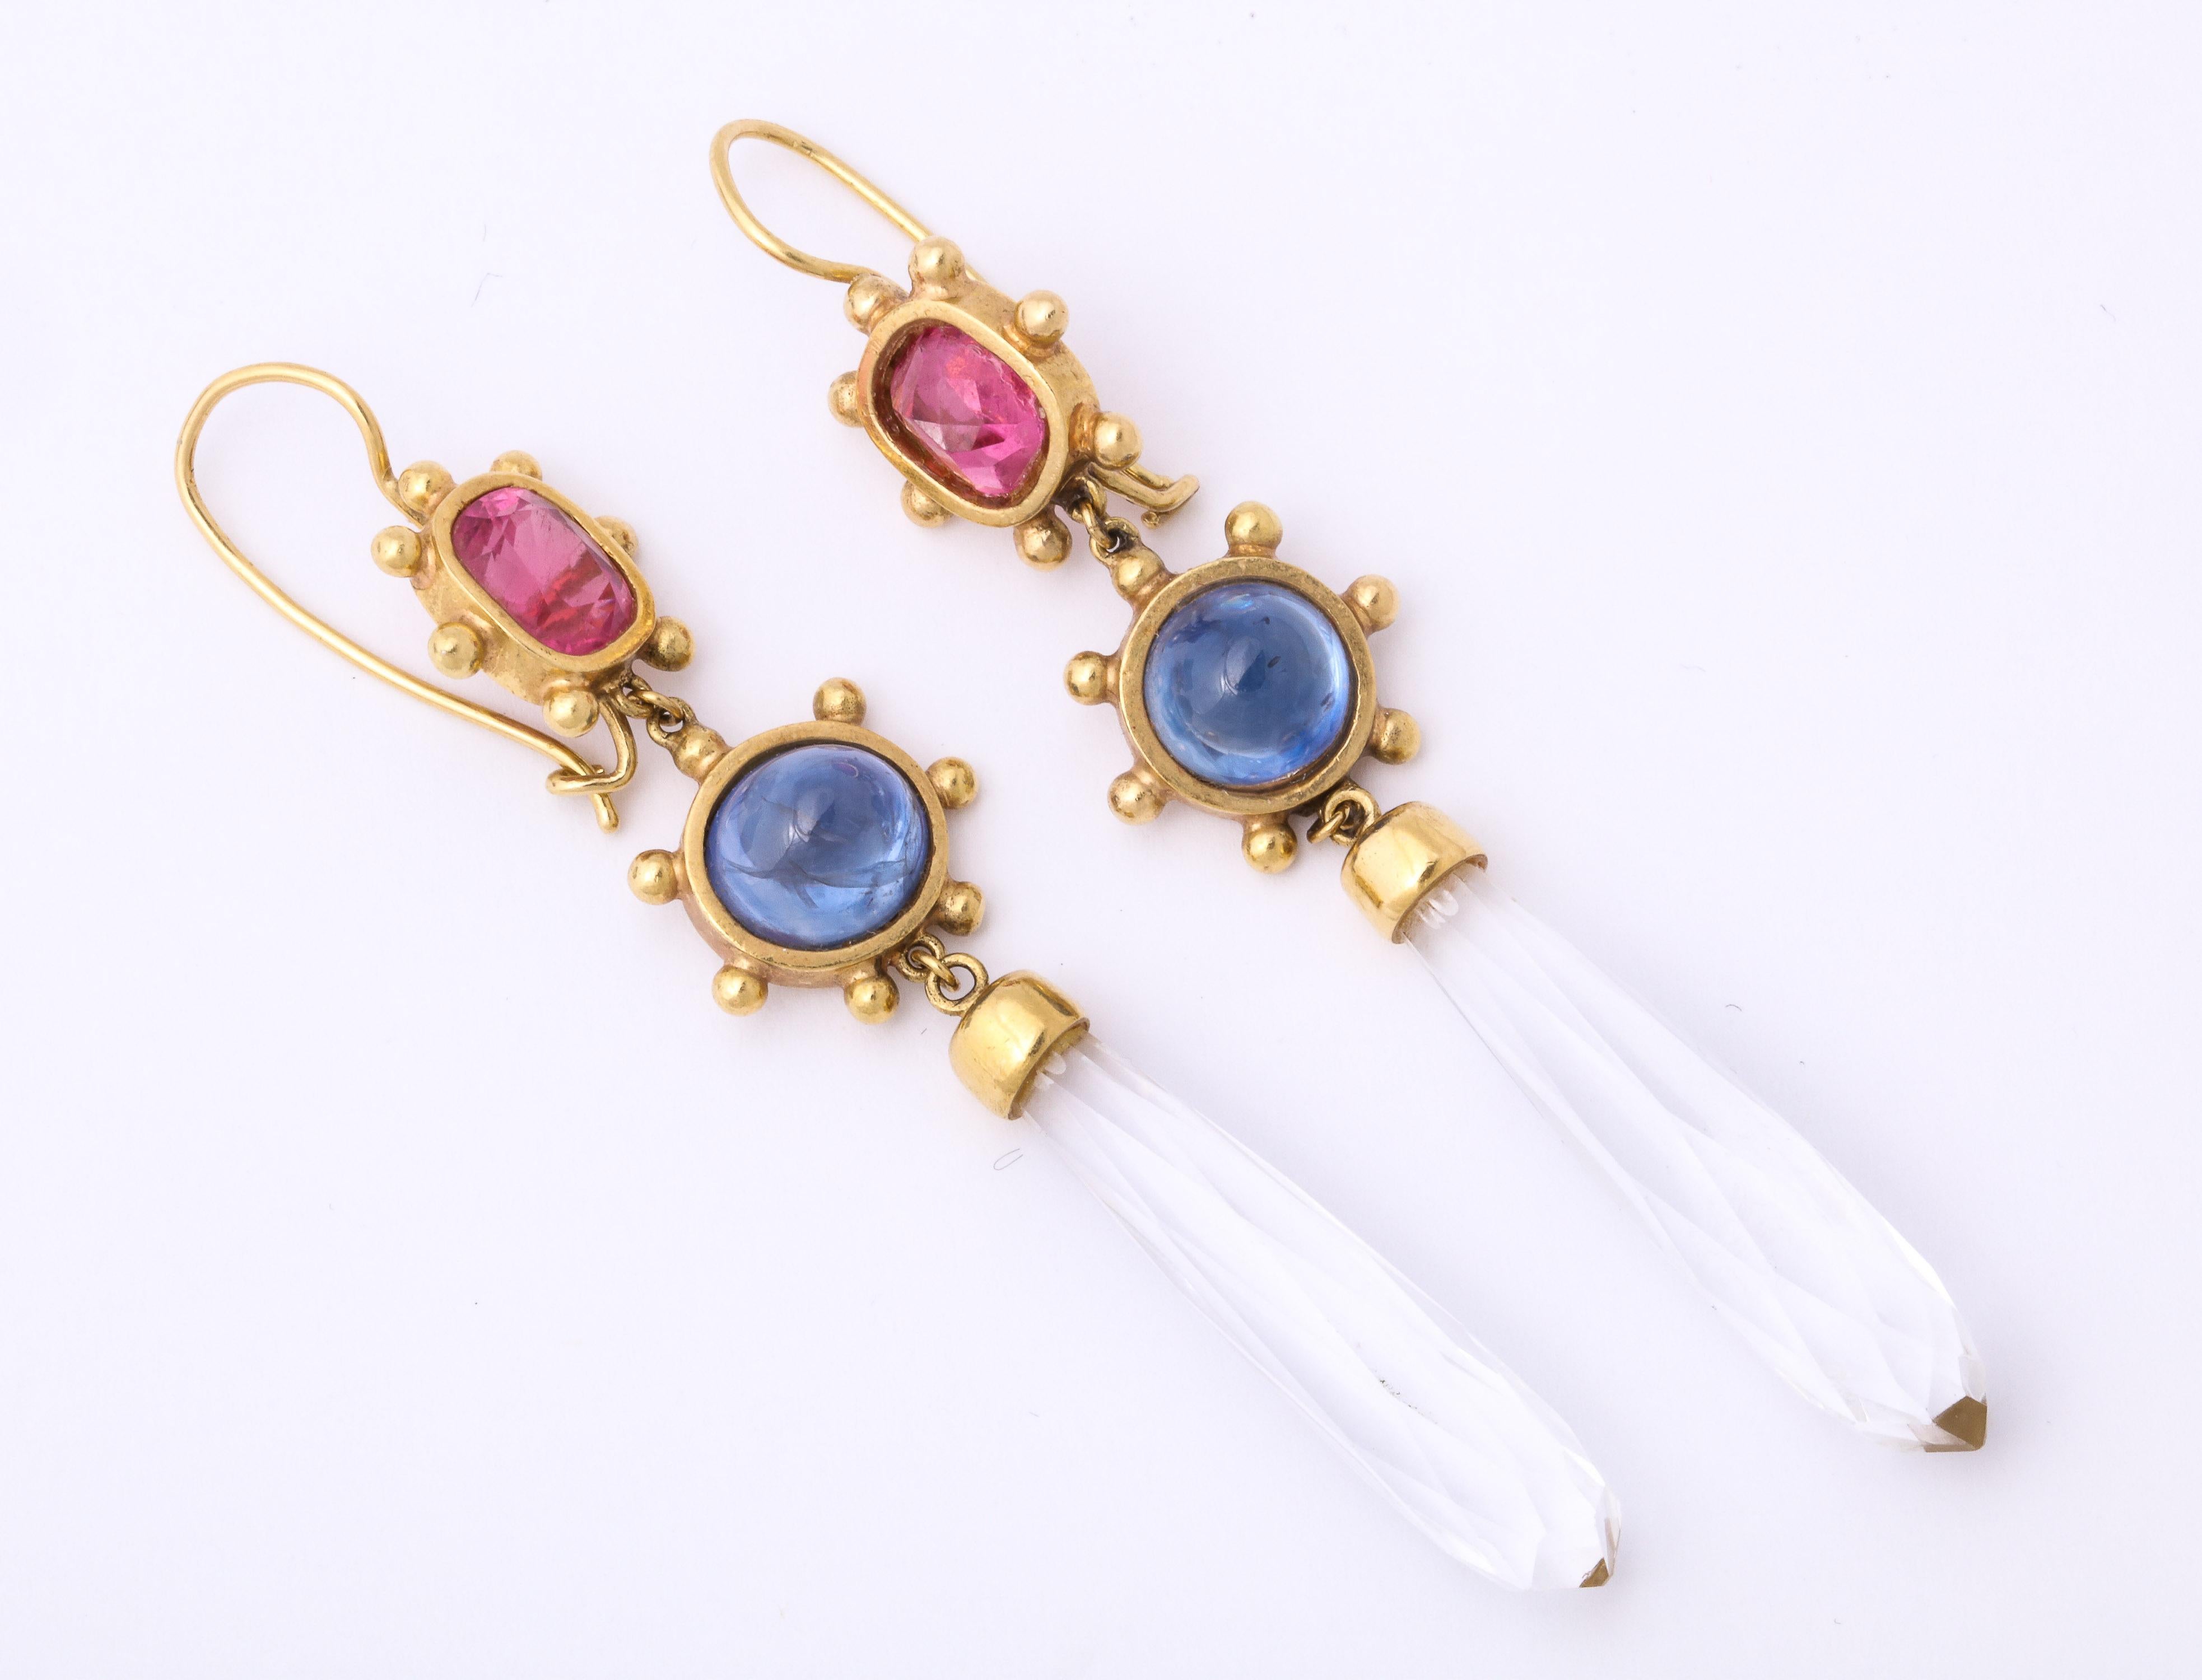 One Pair Of Ladies 18kt Yellow Gold Drop Earrings designed with Two Faceted Pink Tourmalines weighing approximately 2 Carats each and further Embellished With 2 Cabochon beautiful color sapphires weighing approximately 2 carats each . Earrings are